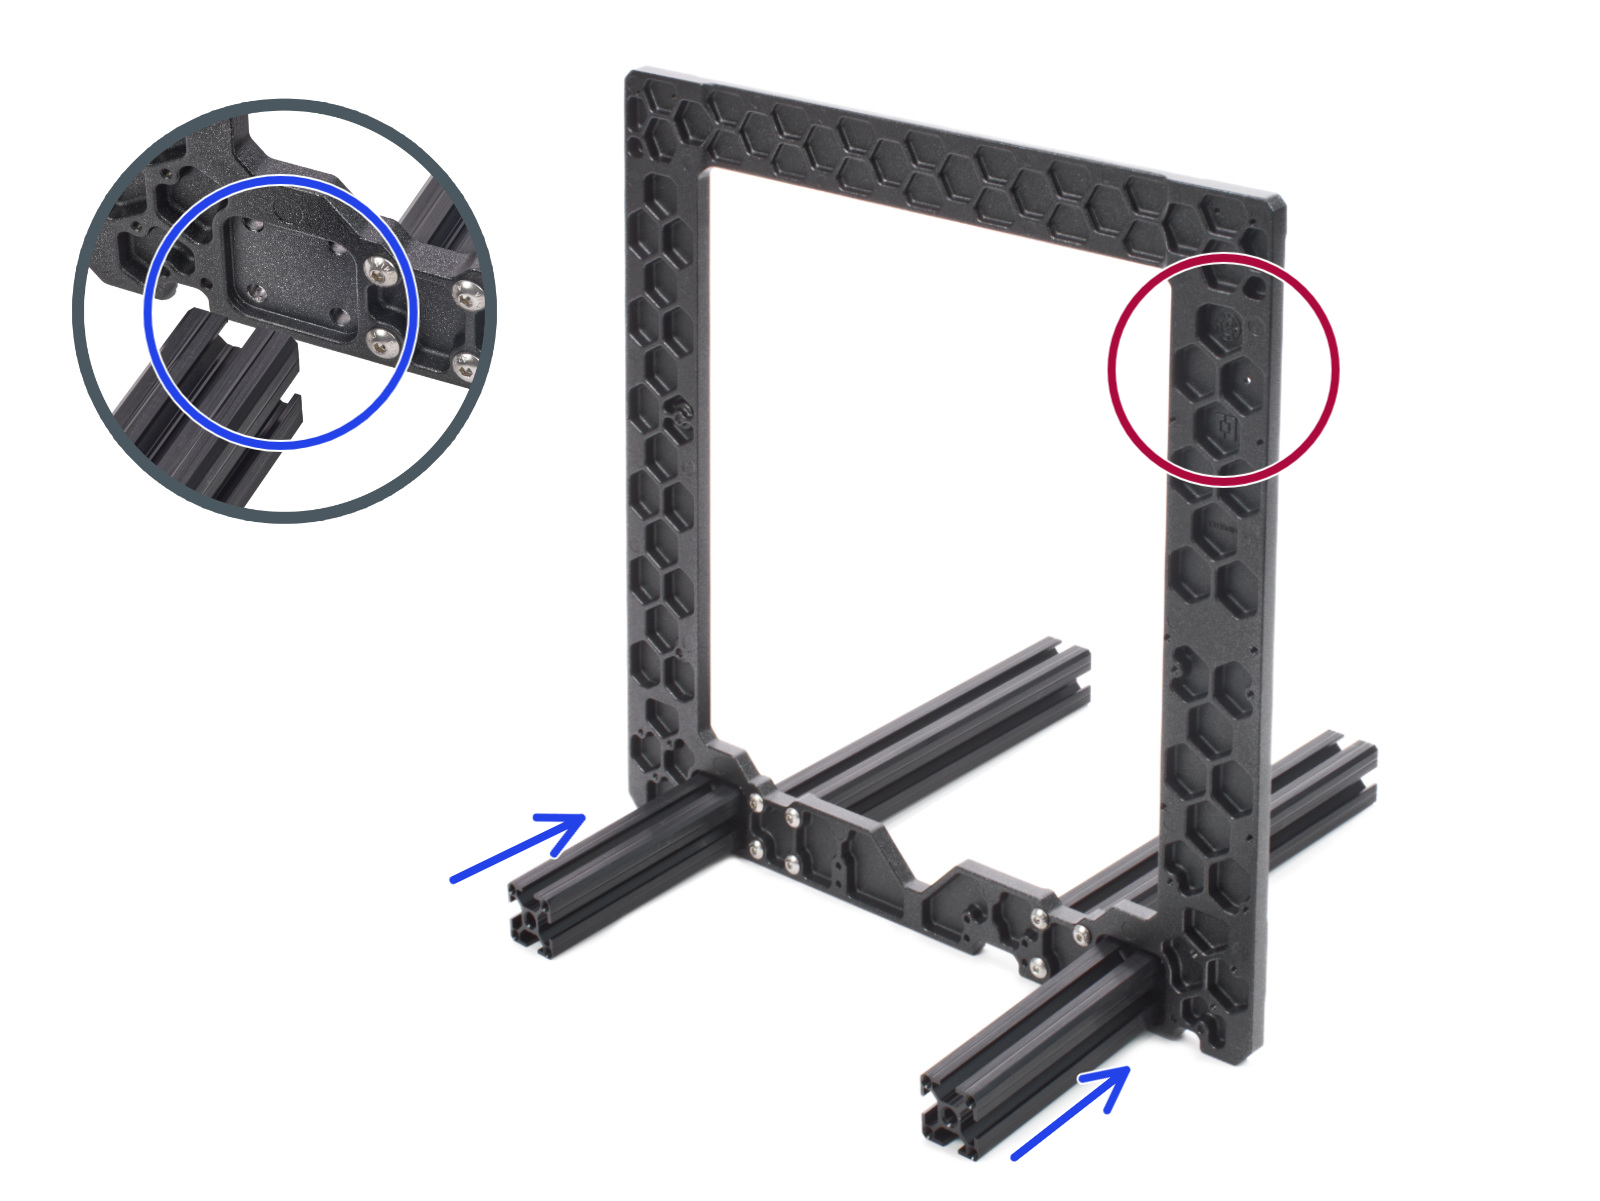 YZ frame: mounting the shorter extrusions